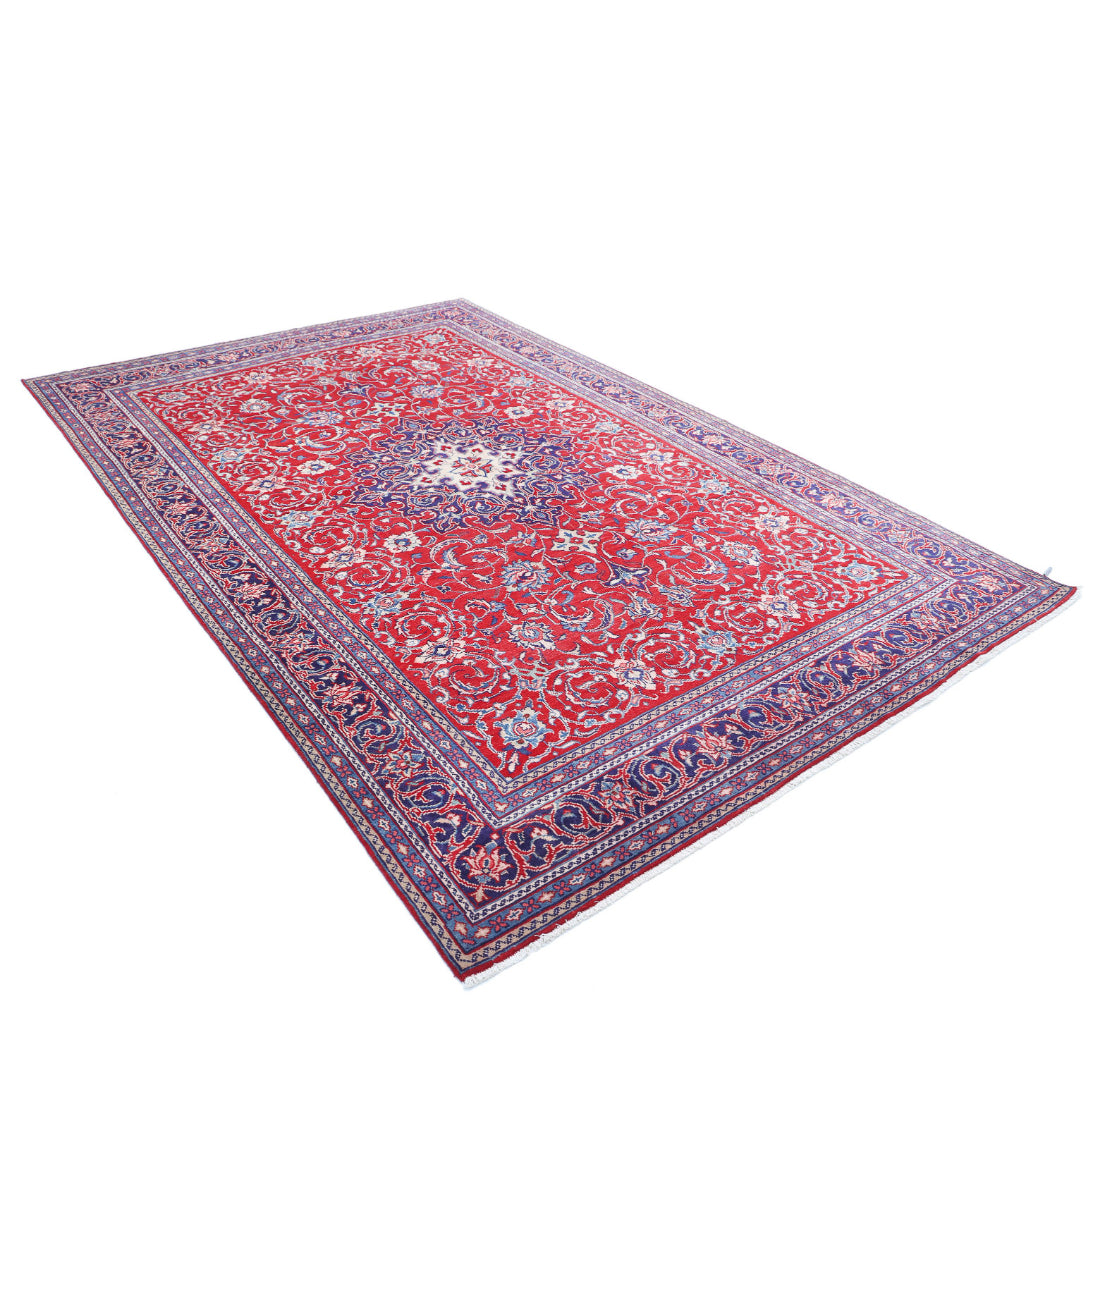 Hand Knotted Persian Mahal Wool Rug - 6'10'' x 10'5'' 6'10'' x 10'5'' (205 X 313) / Red / Blue